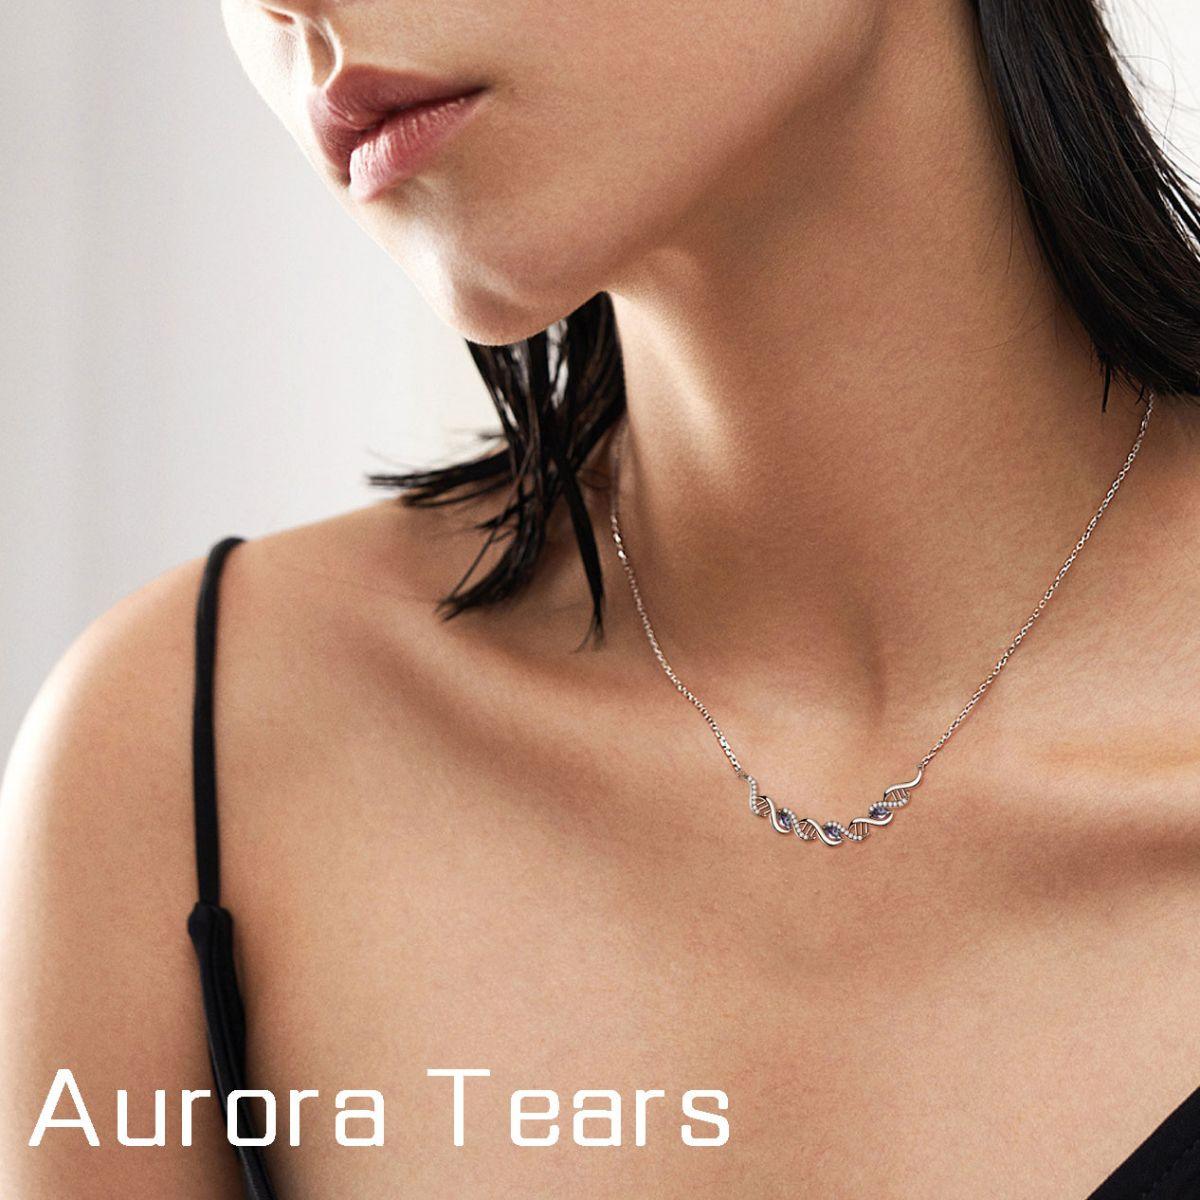 Infinity Spiral DNA Double Helix Necklaces Sterling Silver - Necklaces - Aurora Tears